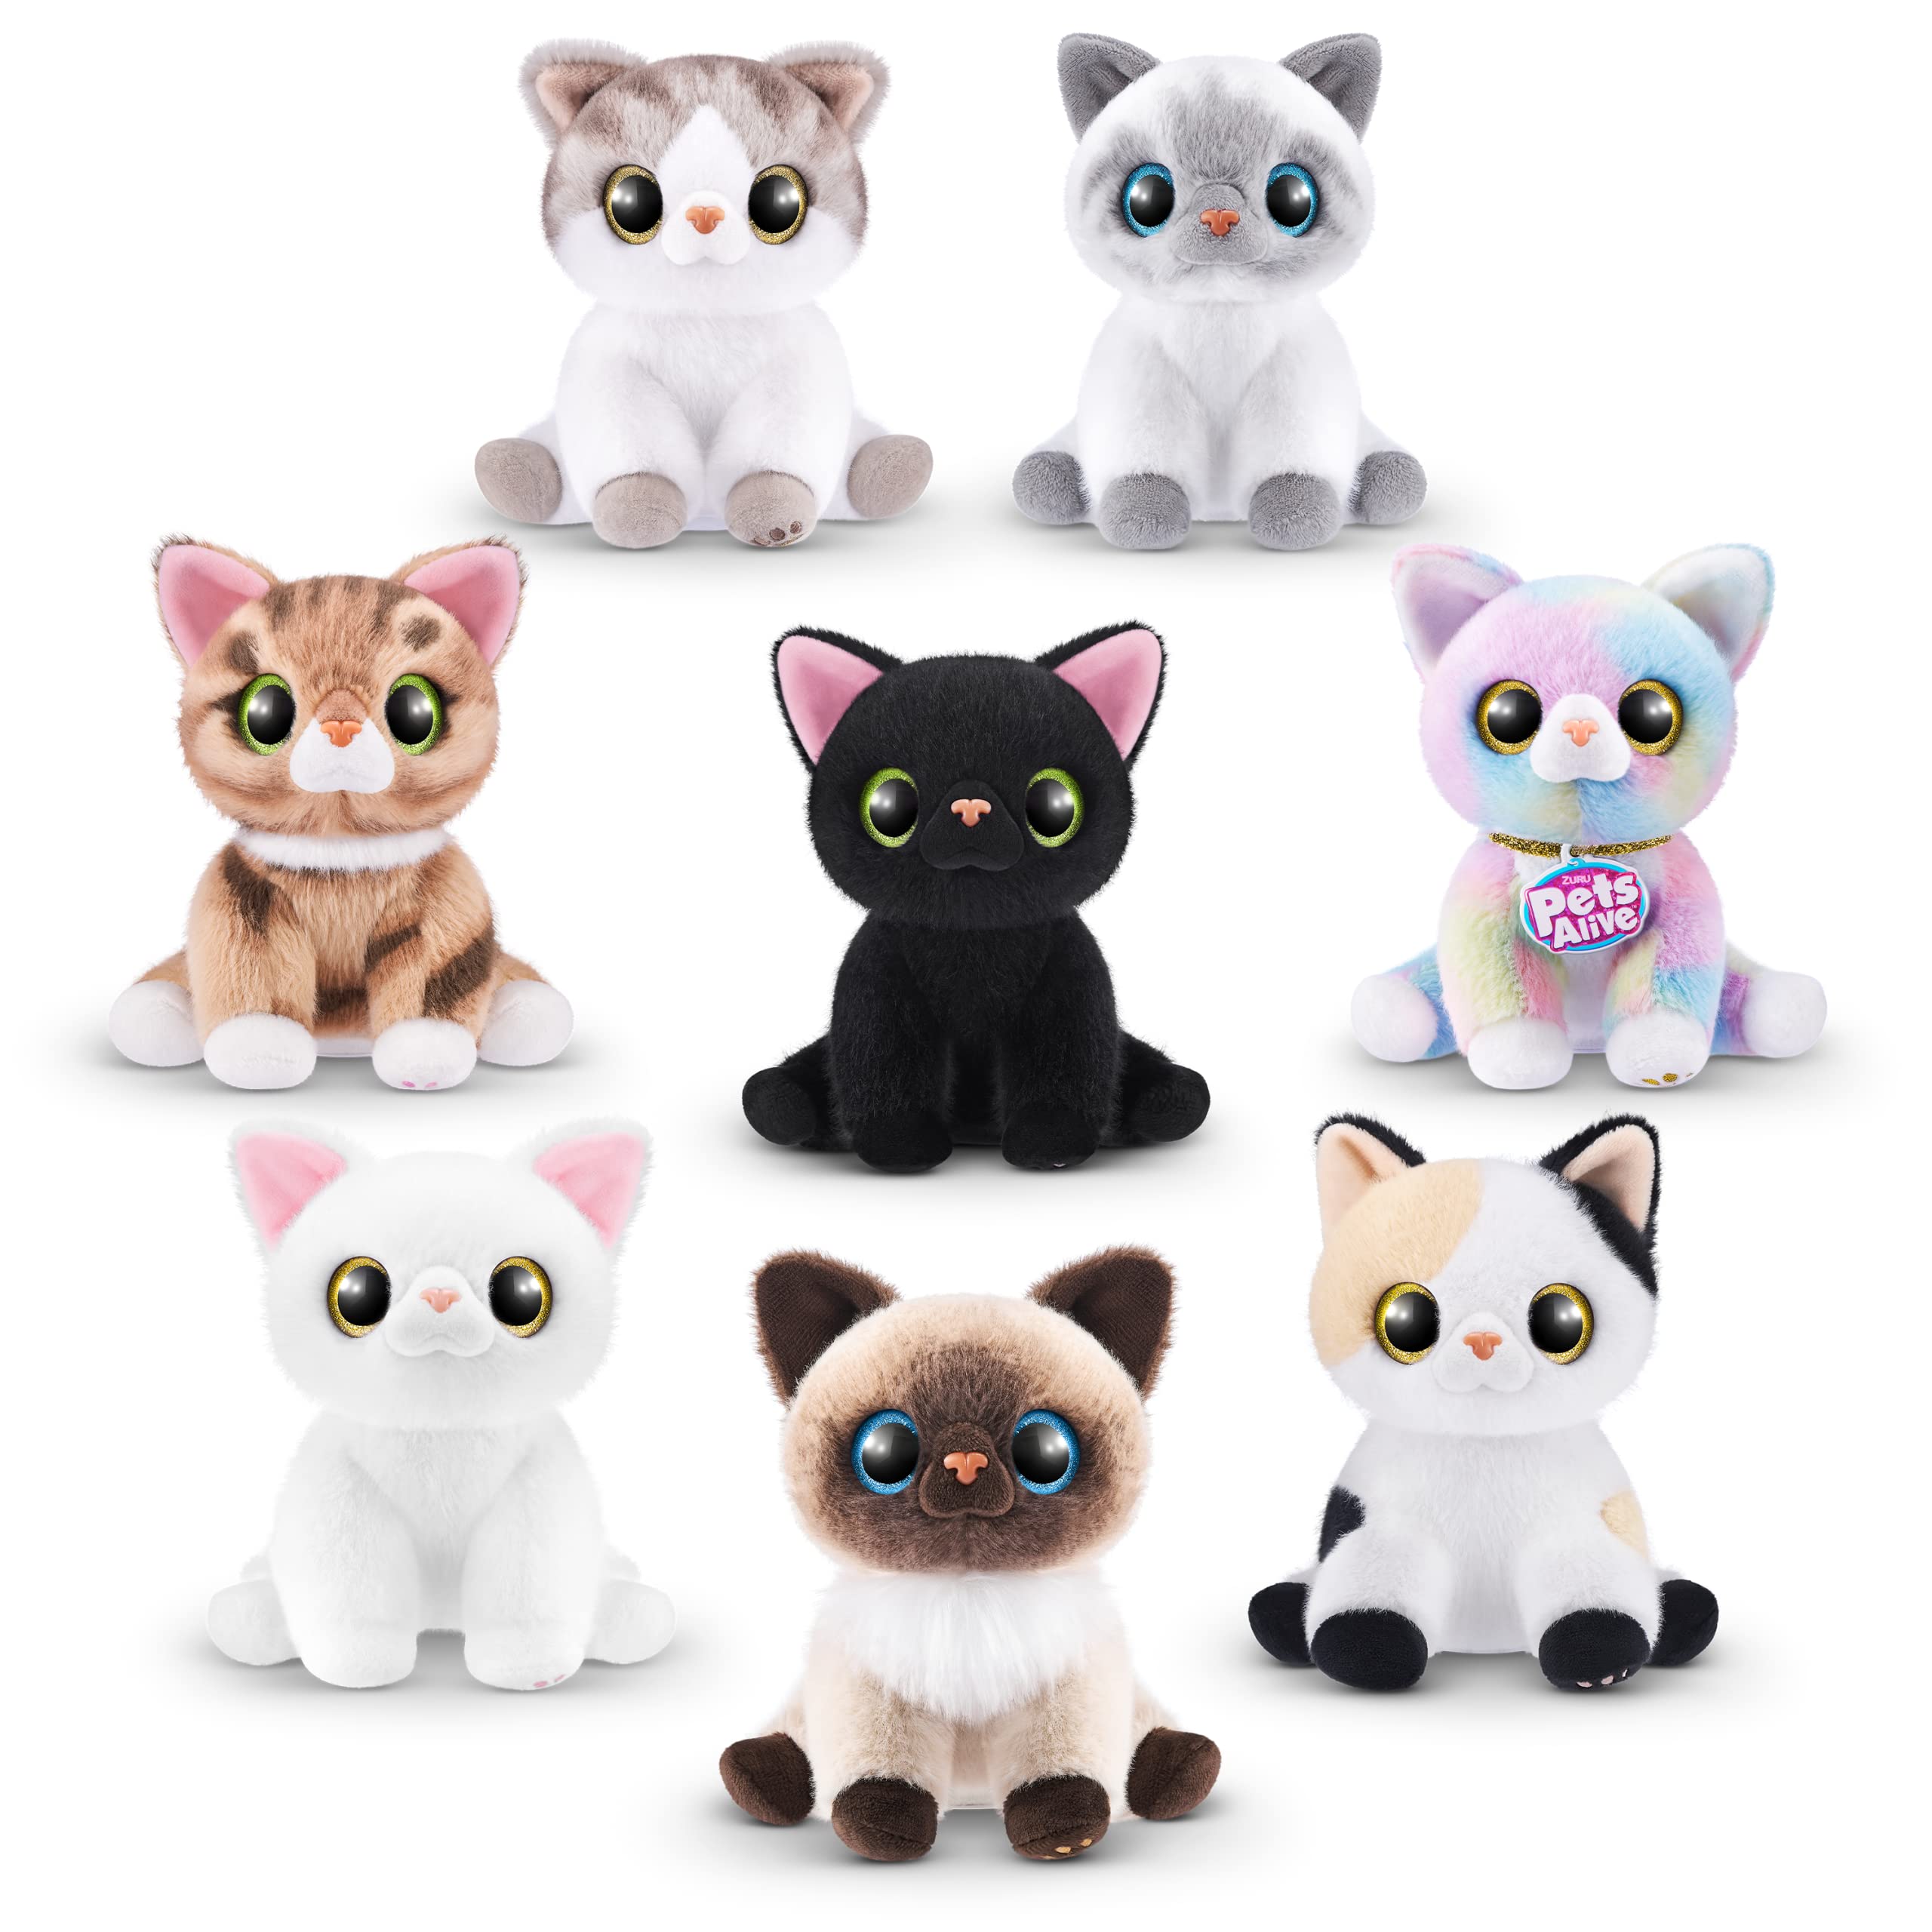 Pets Alive Smitten Kittens Surprise (Siamese Cat Mooloo) by ZURU Nurture Play Soft Toy Unboxing Adopt Interactive 10 Sounds